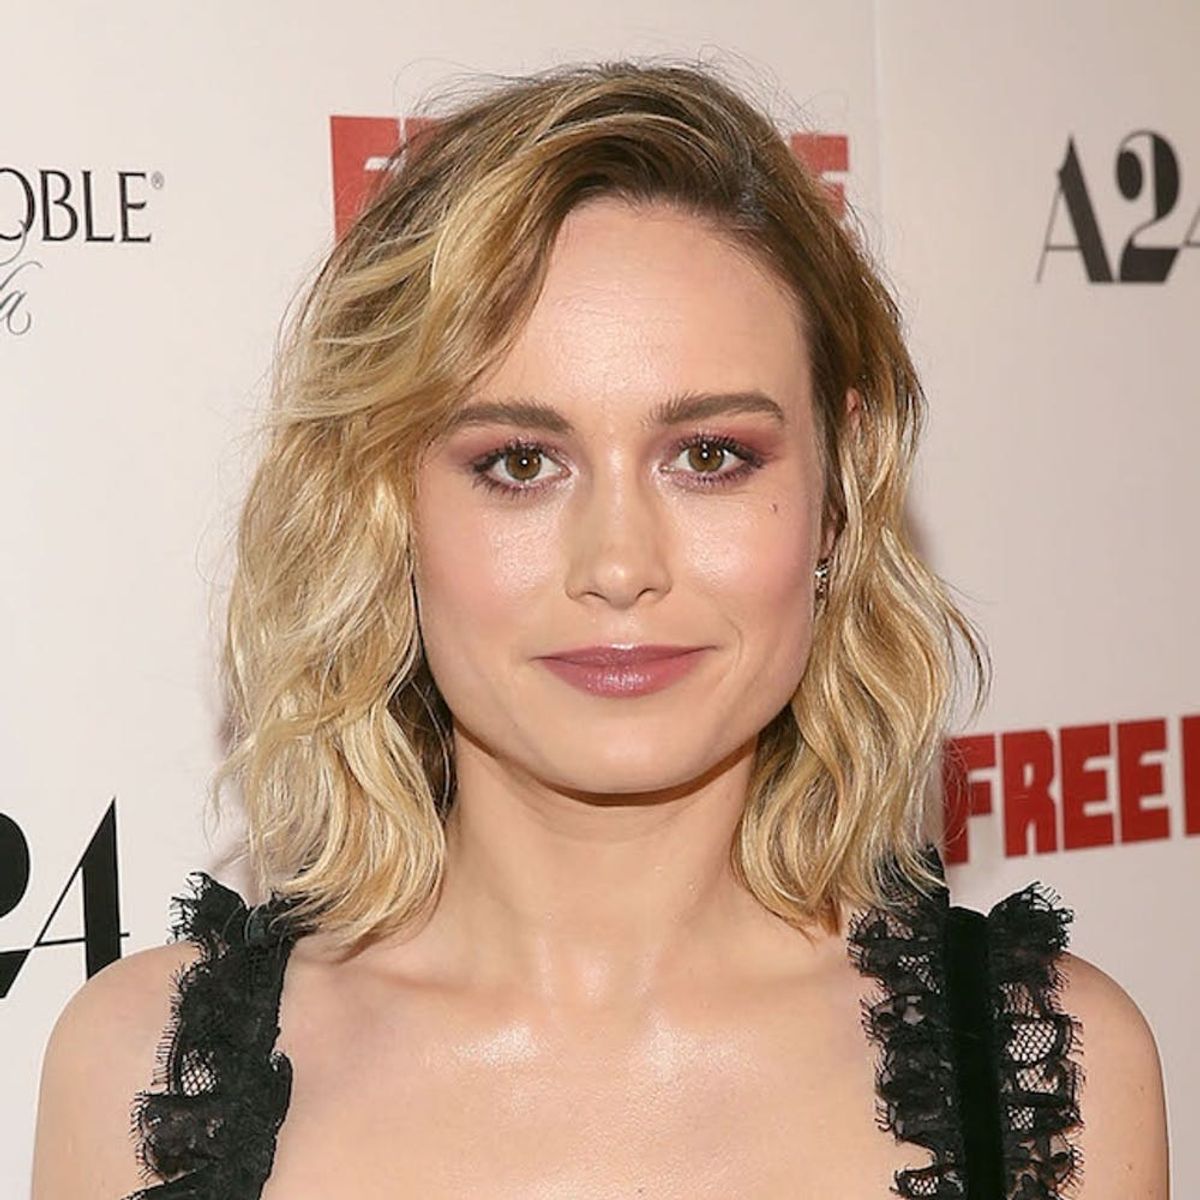 Brie Larson Has the BEST Advice for Millennials Stressed About Adulting